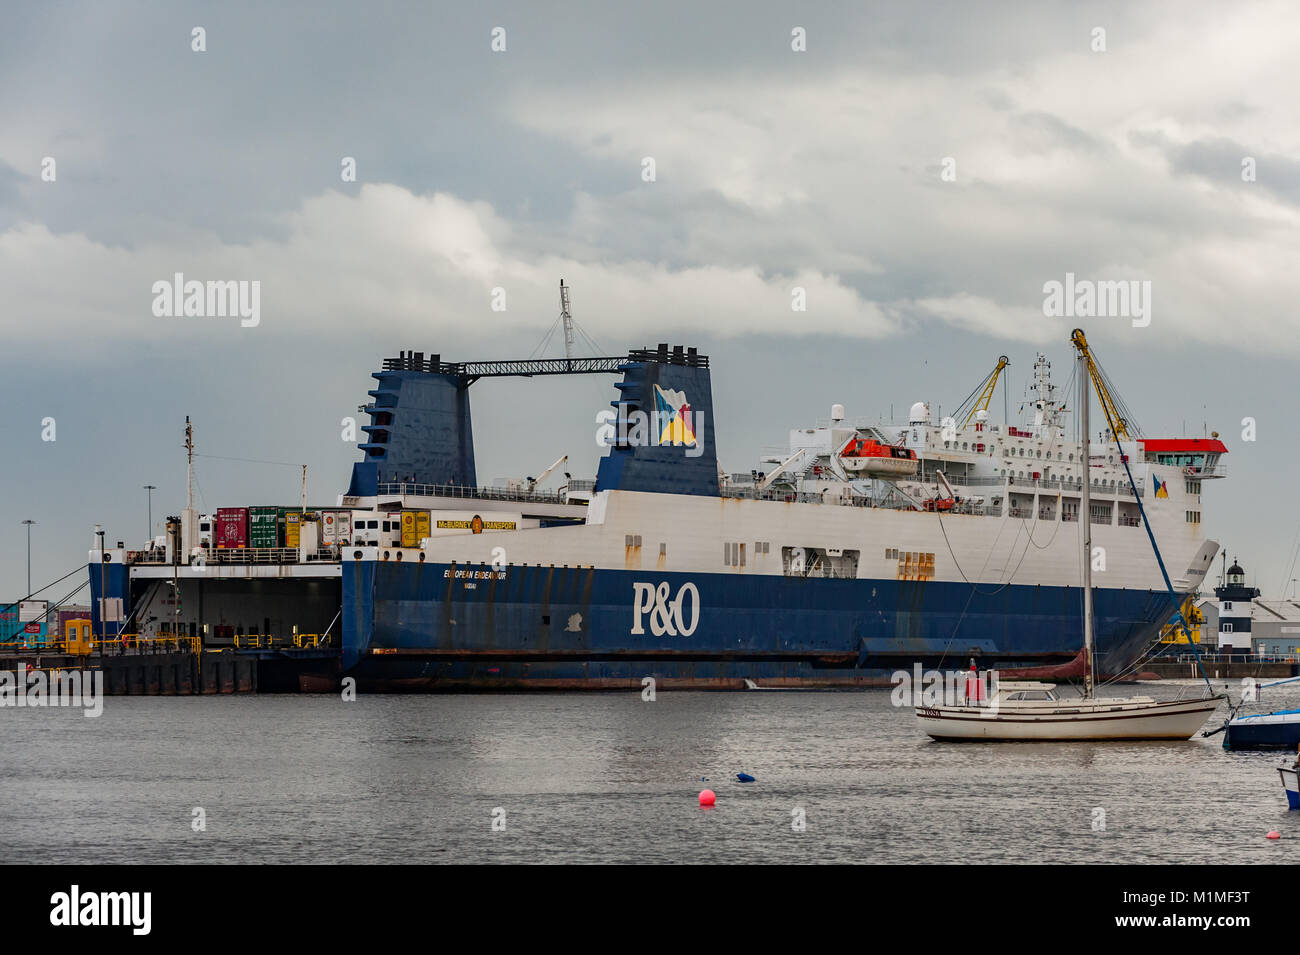 P&O Ro-Ro ferry 'European Endeavour' moored at Dublin Docks, Ireland before departure with copy space. Stock Photo